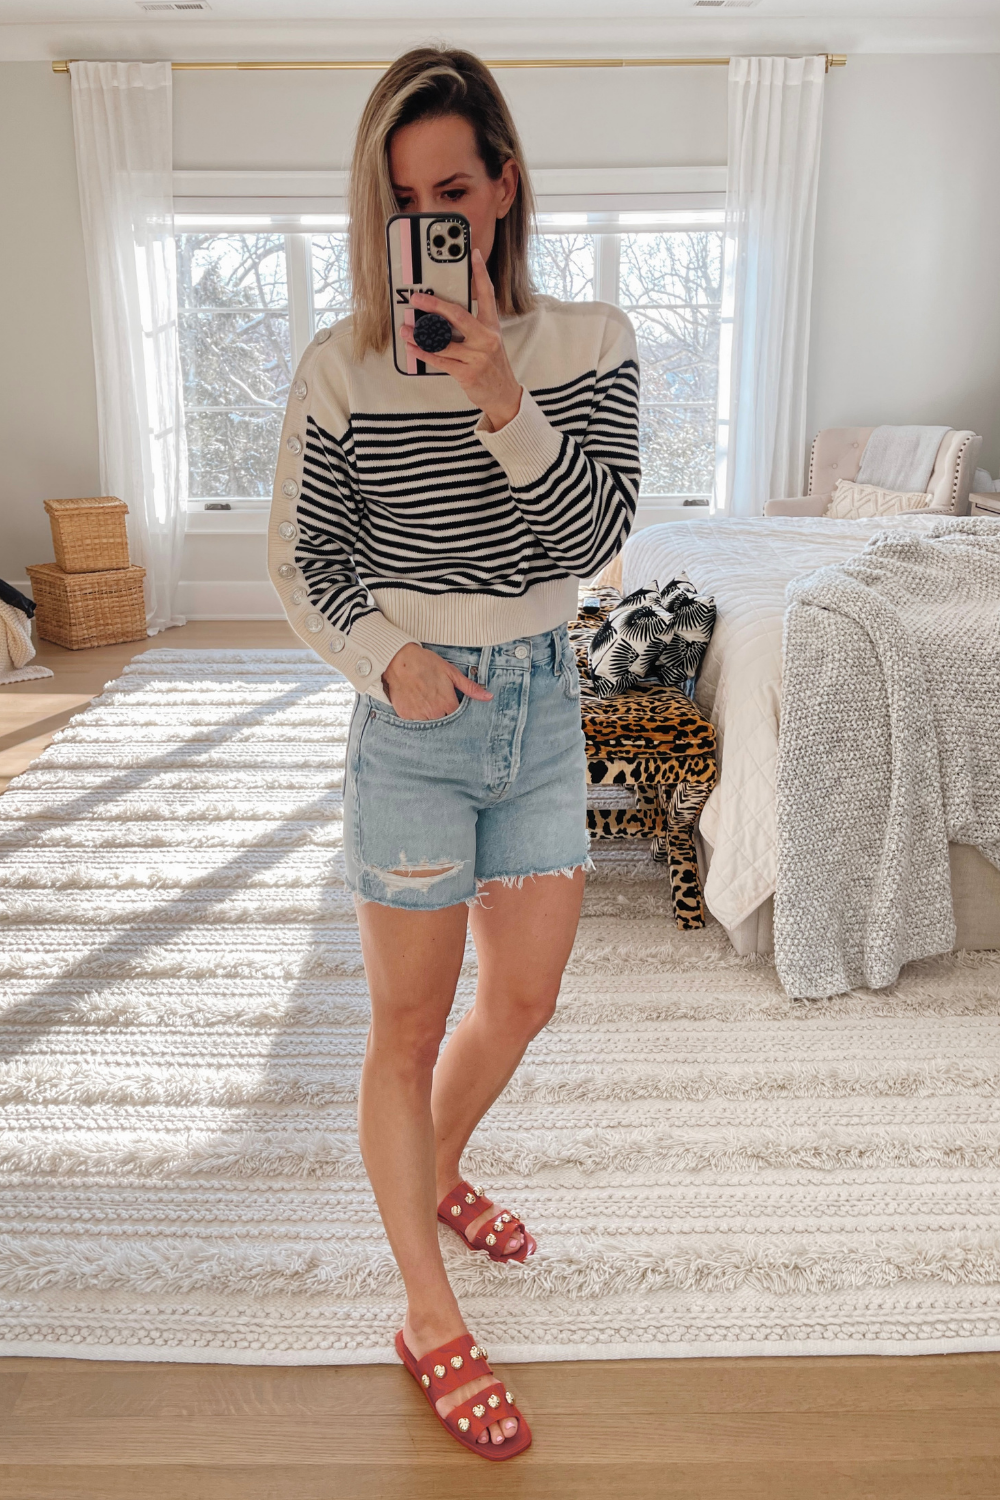 Suzanne wearing a striped sweater, denim shorts, and sandals